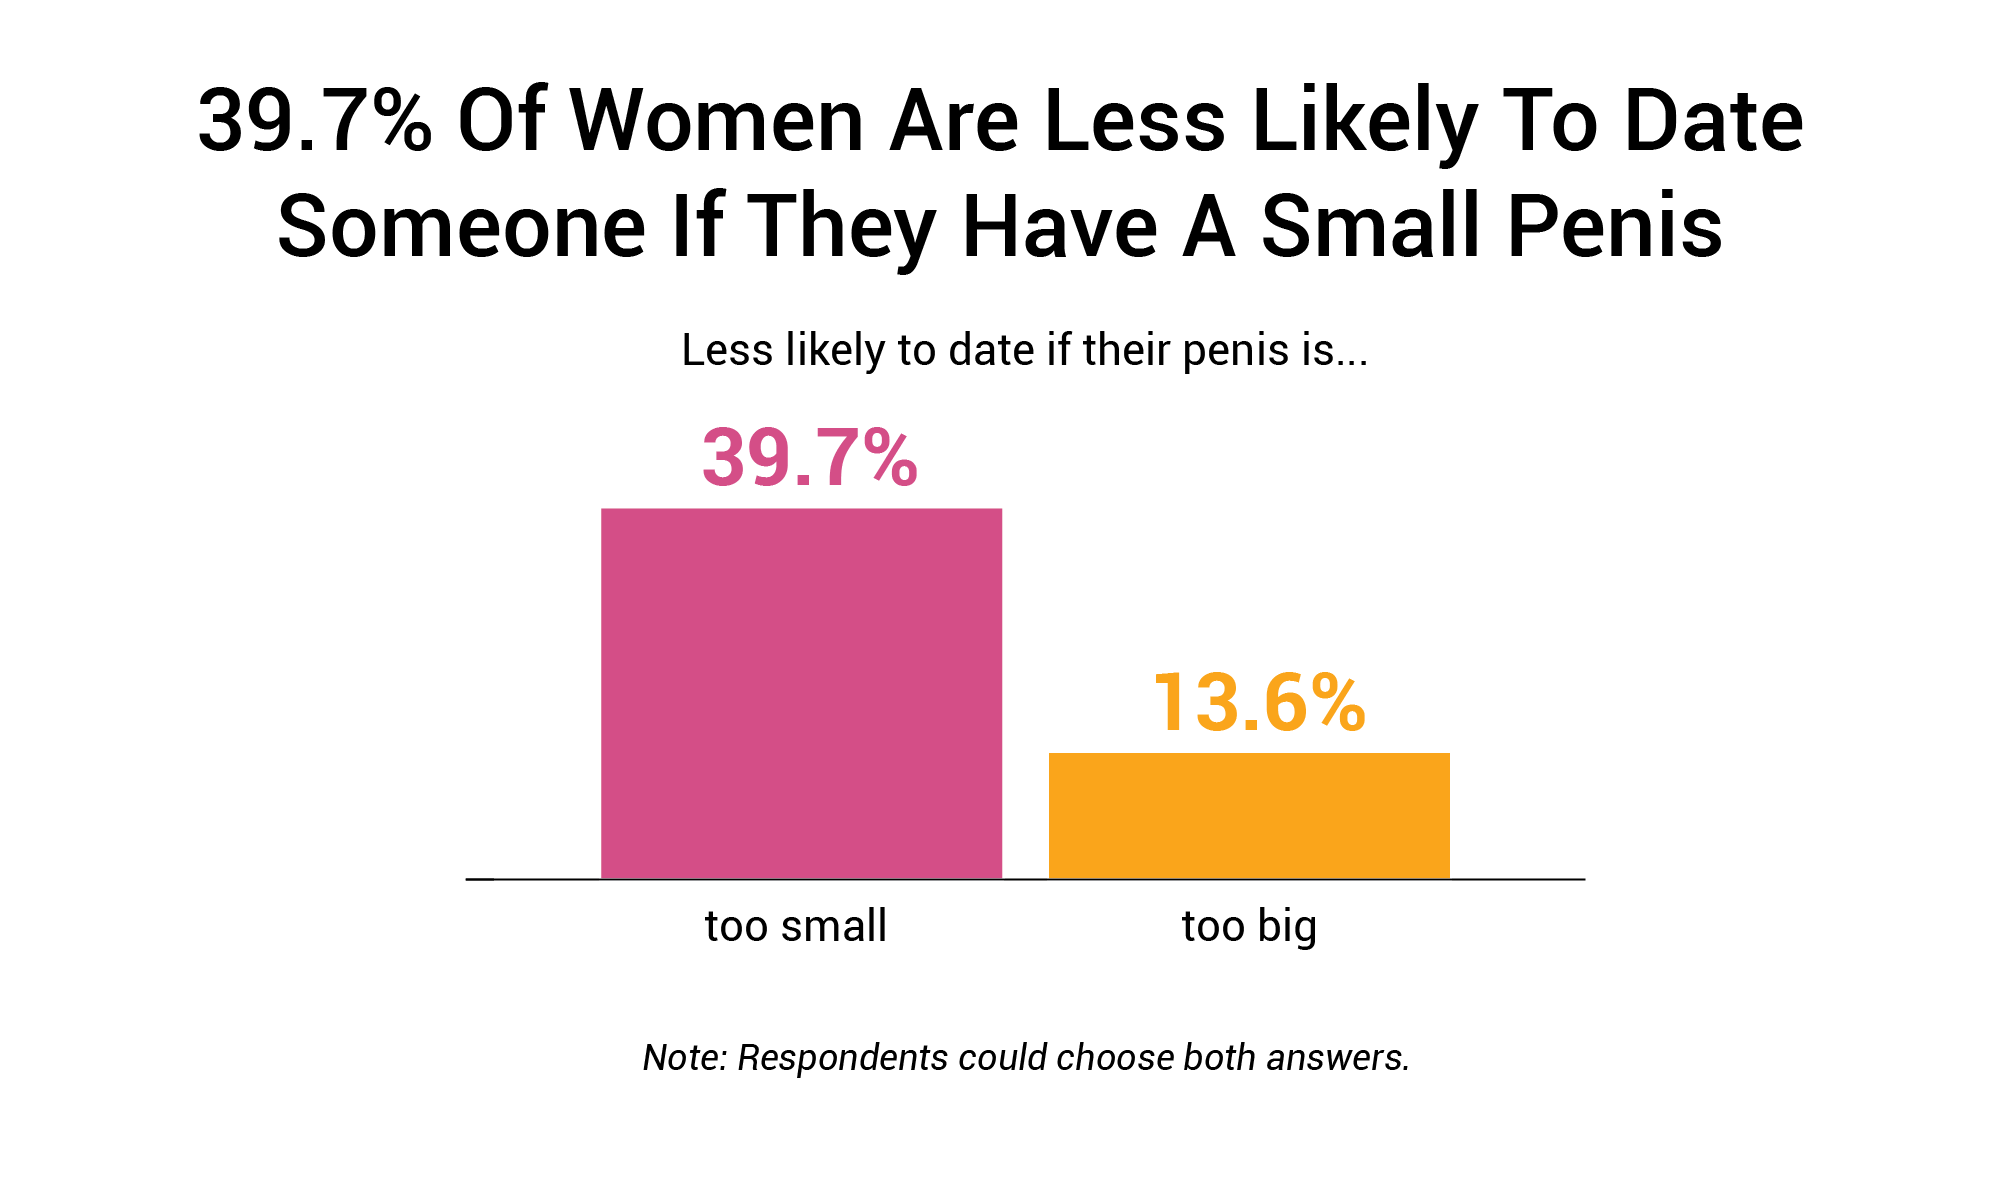 39.7-Of-Women-Are-Less-Likely-To-Date-Someone-If-They-Have-A-Small-Penis.png